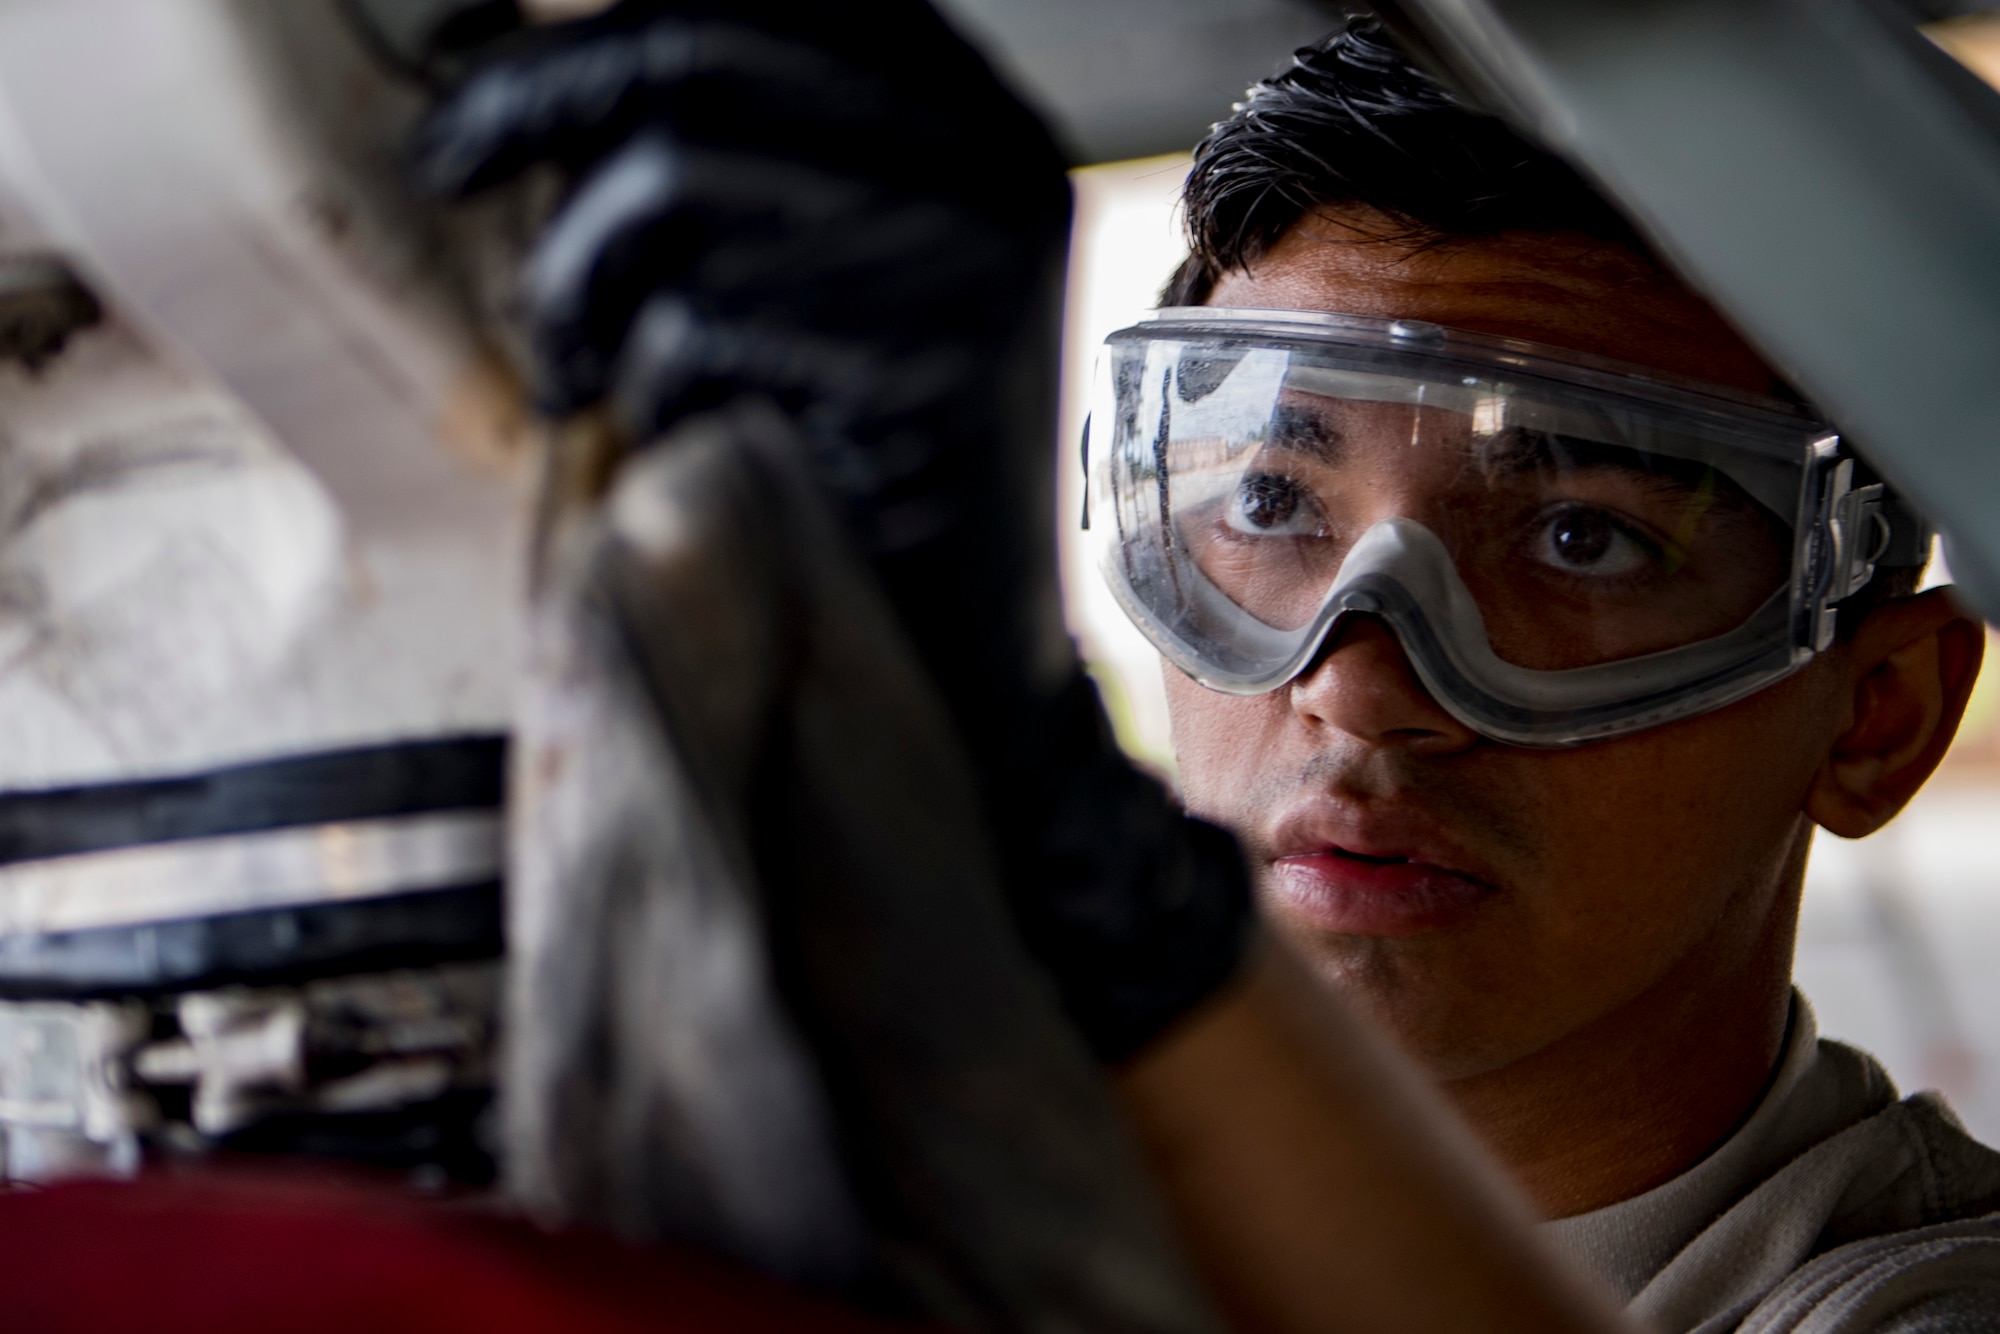 Airman 1st Class Matthew Din, 23d Aircraft Maintenance Squadron 74th Aircraft Maintenance Unit crew chief, wipes away grease before washing an A-10C Thunderbolt II, Aug. 28, 2017, at Moody Air Force Base, Ga. Maintenance procedures require that A-10s are washed at least every 180 days to prevent maintenance issues and safety hazards to the pilot. Since strong chemicals are used to clean the aircraft Airmen must wear personal protective equipment. (U.S. Air Force photo by Airman 1st Class Daniel Snider)